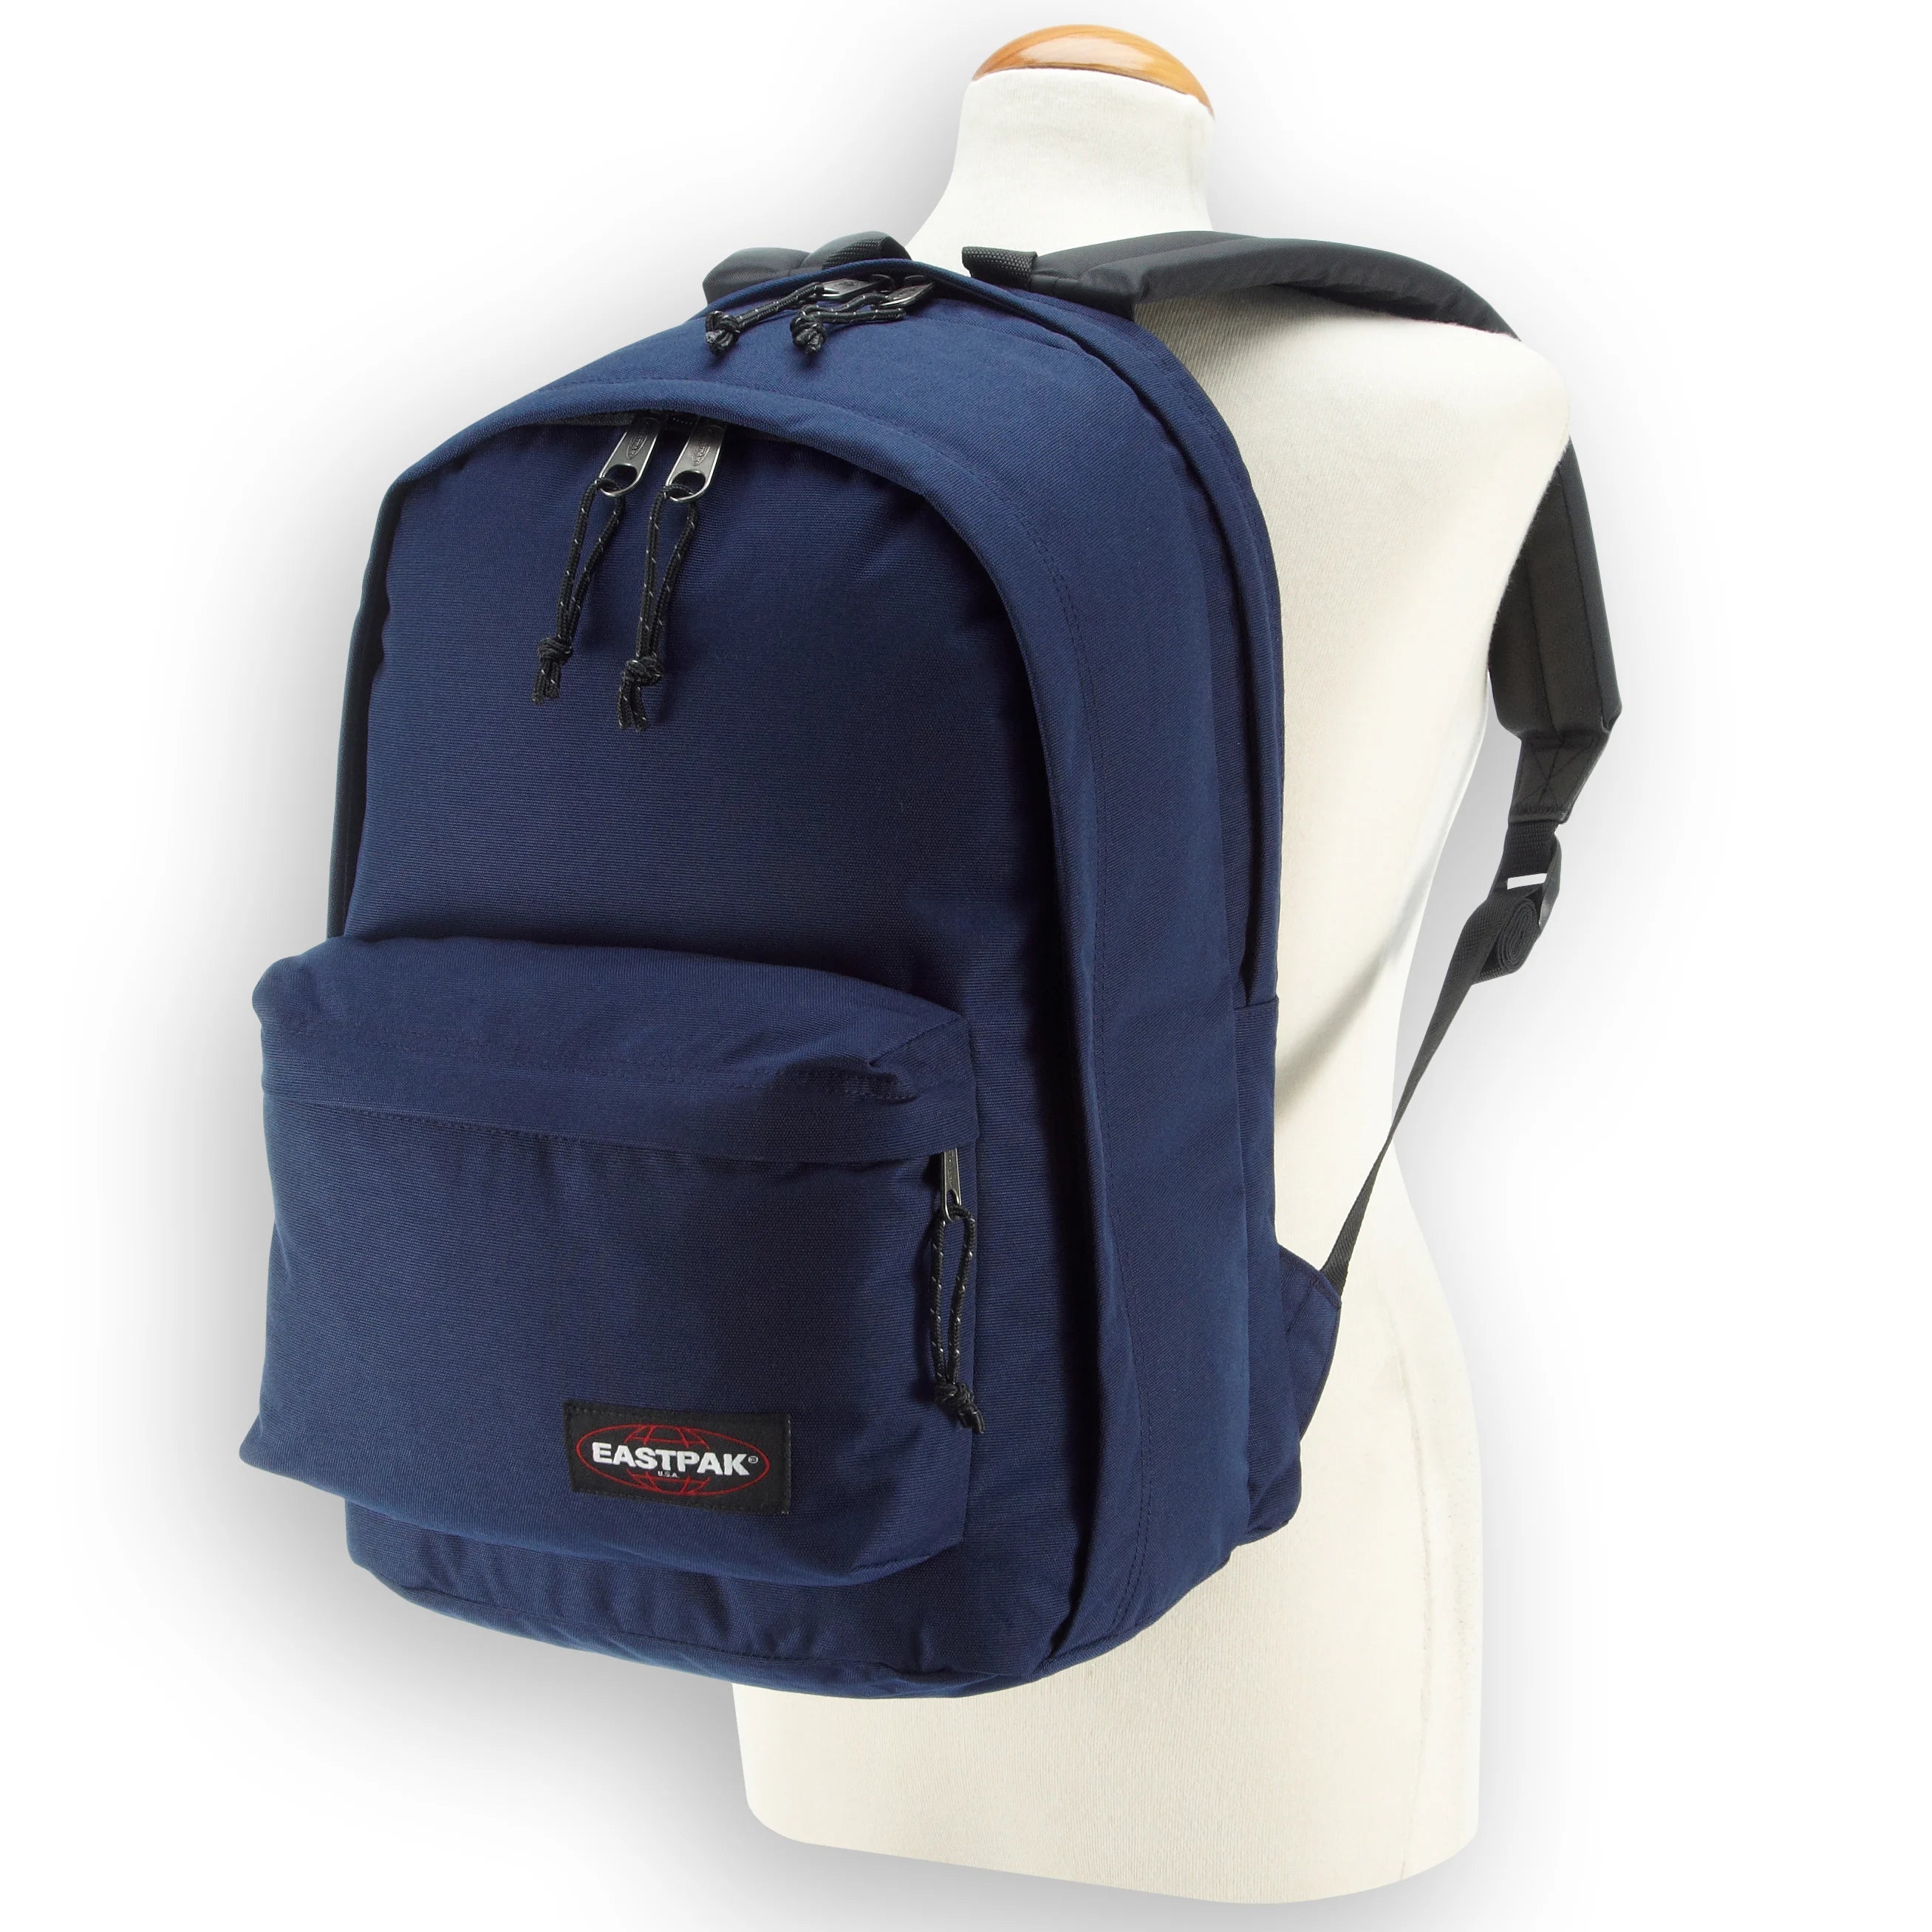 Eastpak Authentic Back to Work backpack with laptop compartment 43 cm - triple denim